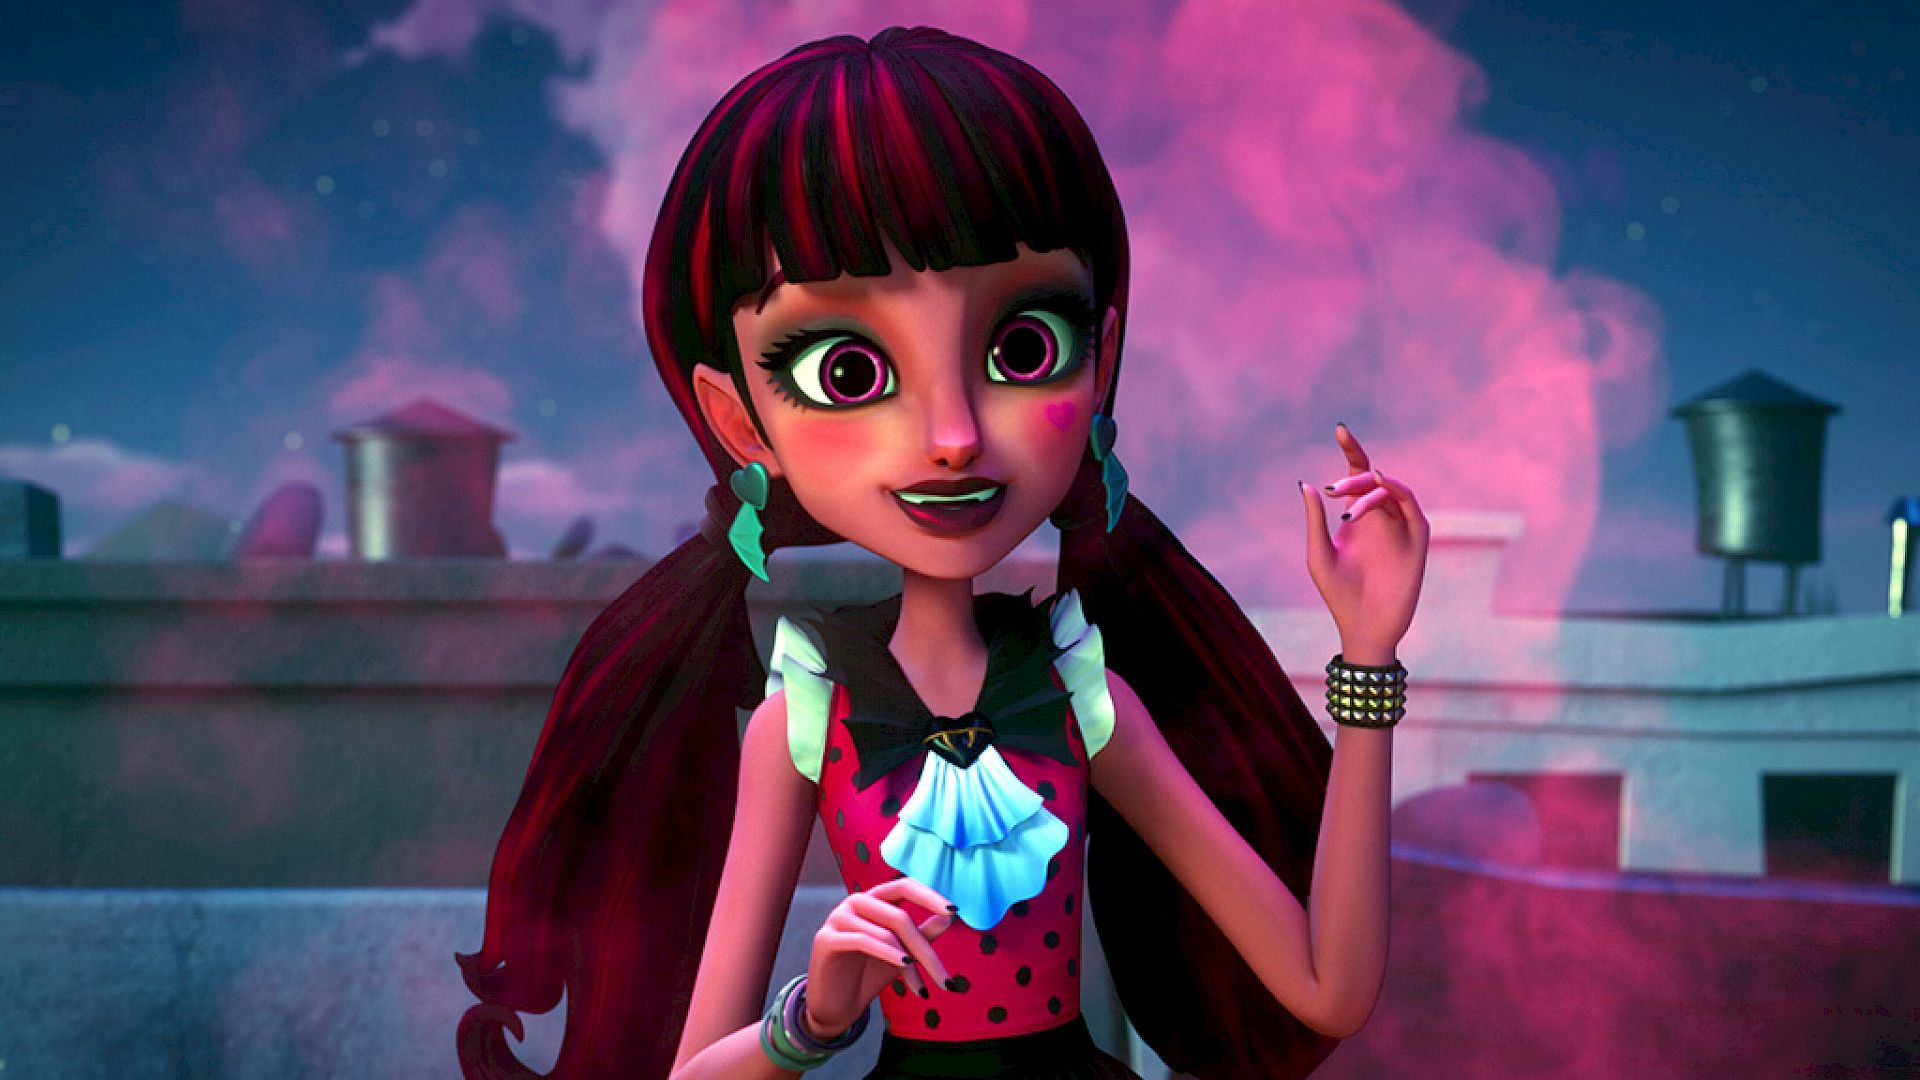 Axis Studios. Adding the Axis touch to Mattel's Monster High Electrified